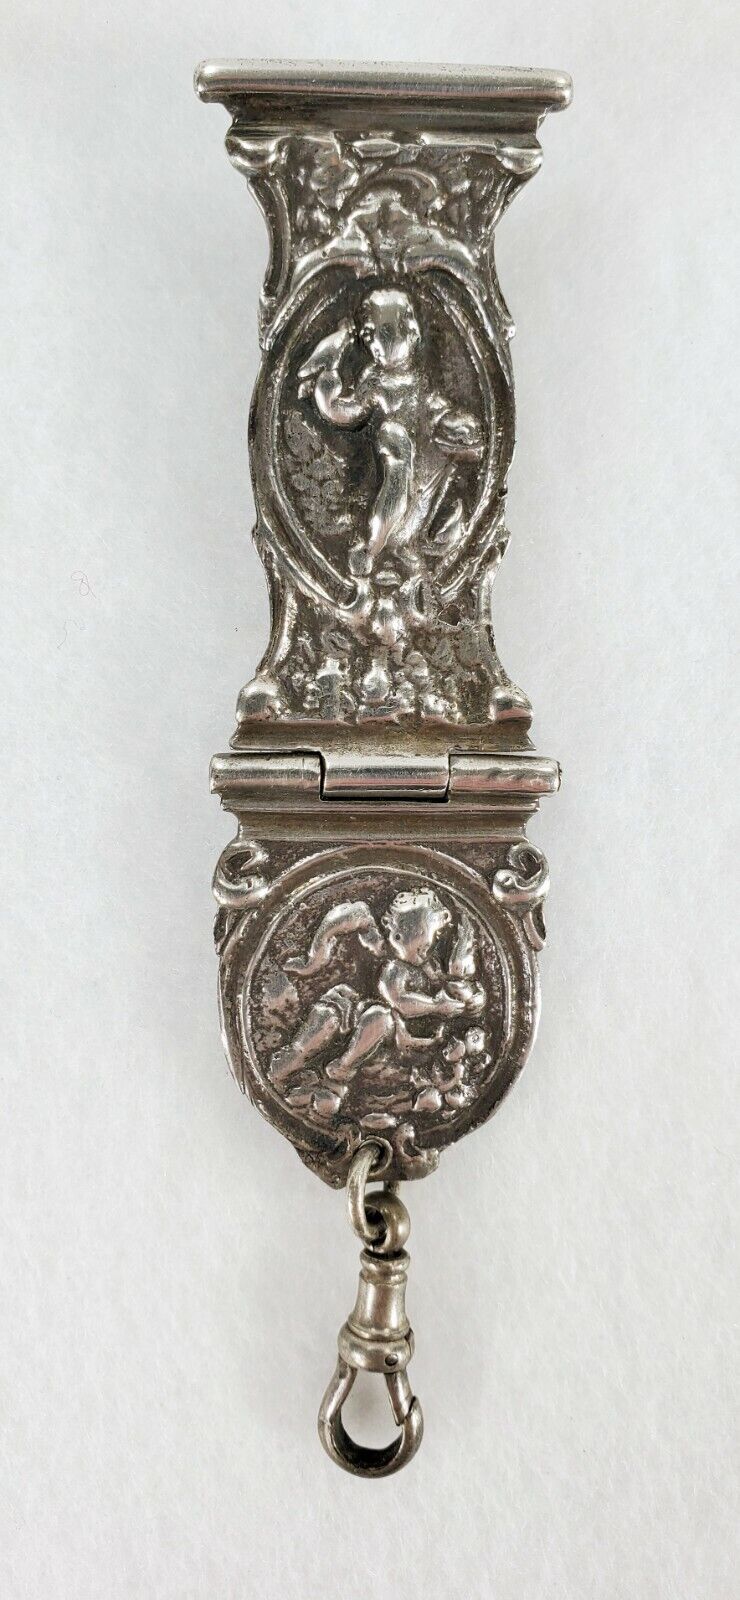 Antique Hinged Repousse' Silver Chatelaine with Putti Angel Decoration